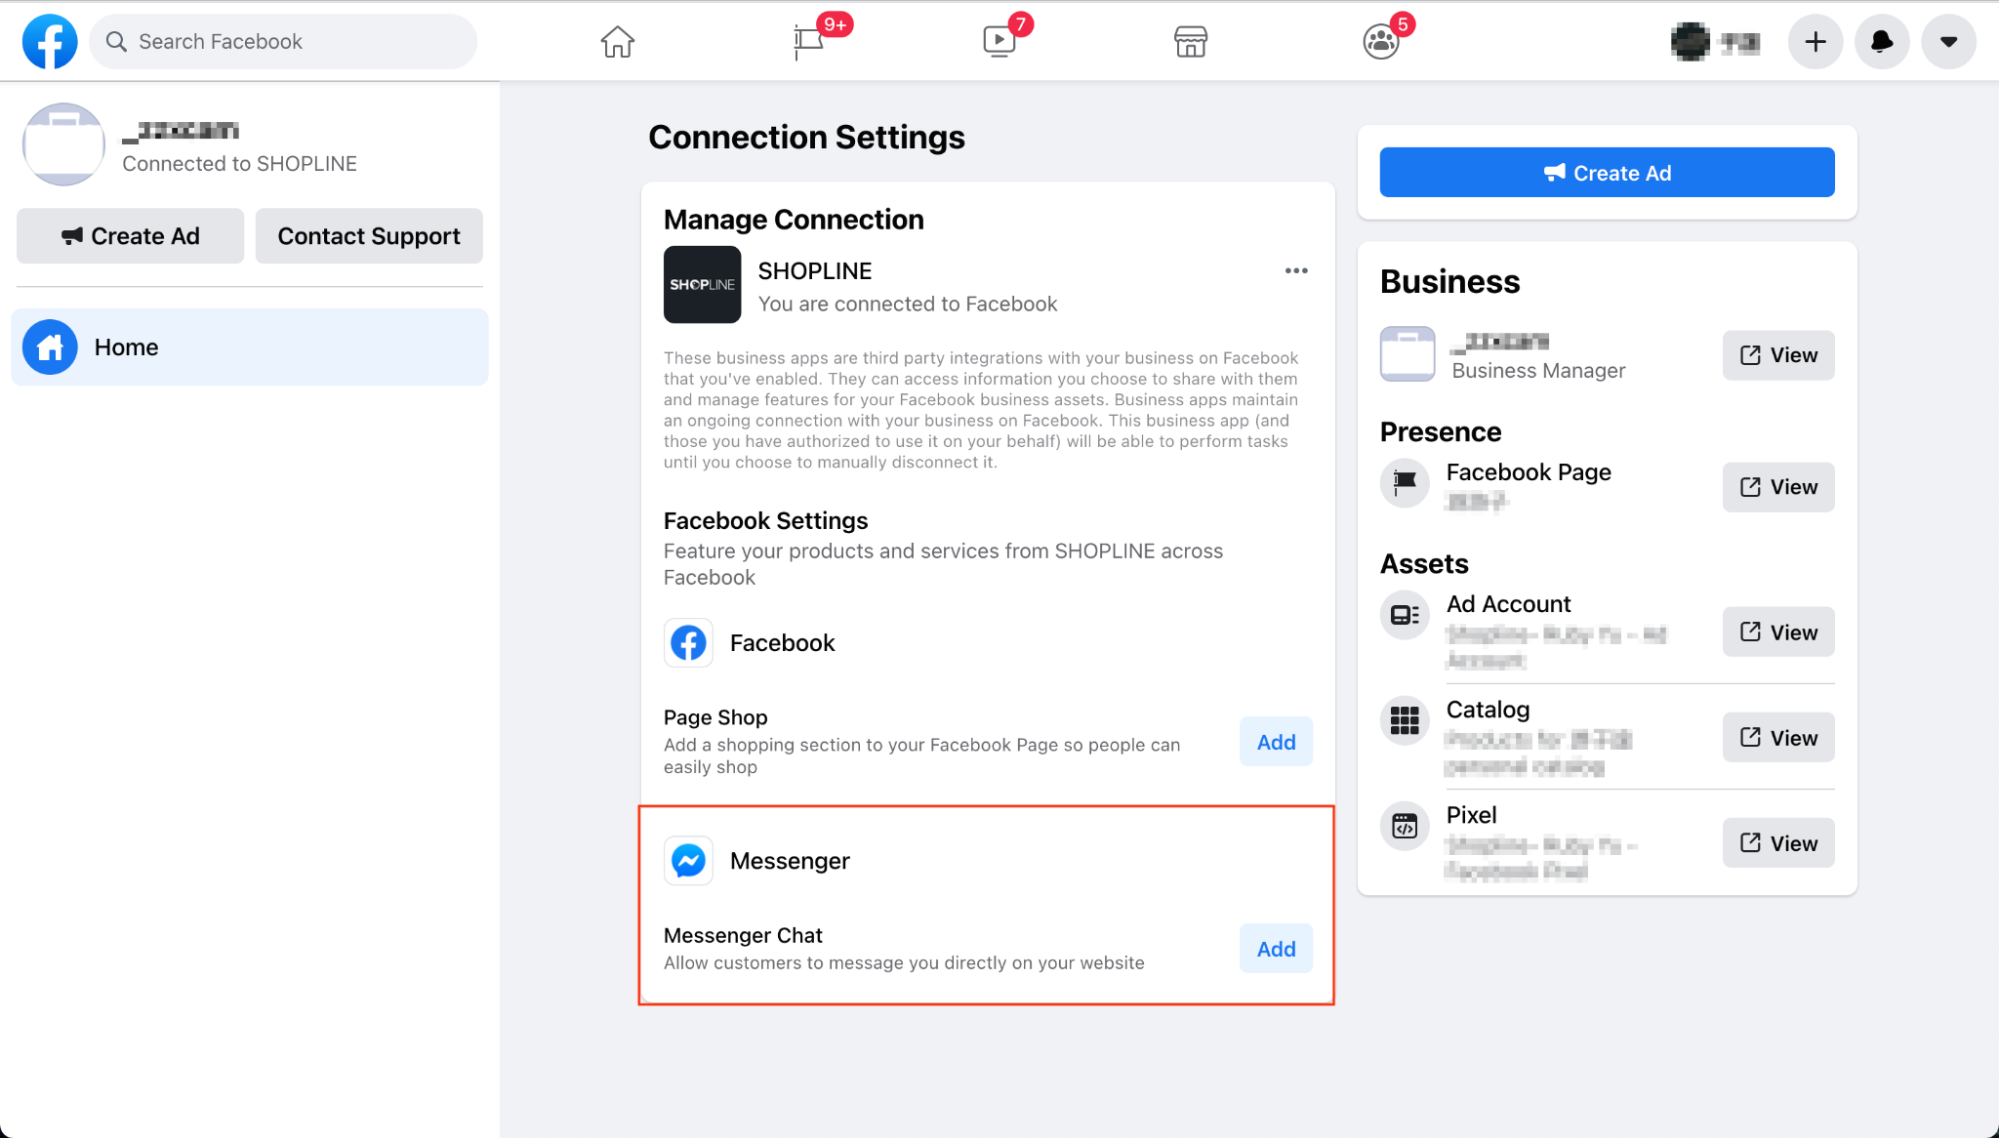 Figure 4. Find Messenger and click “Add” in the Connection Settings. 